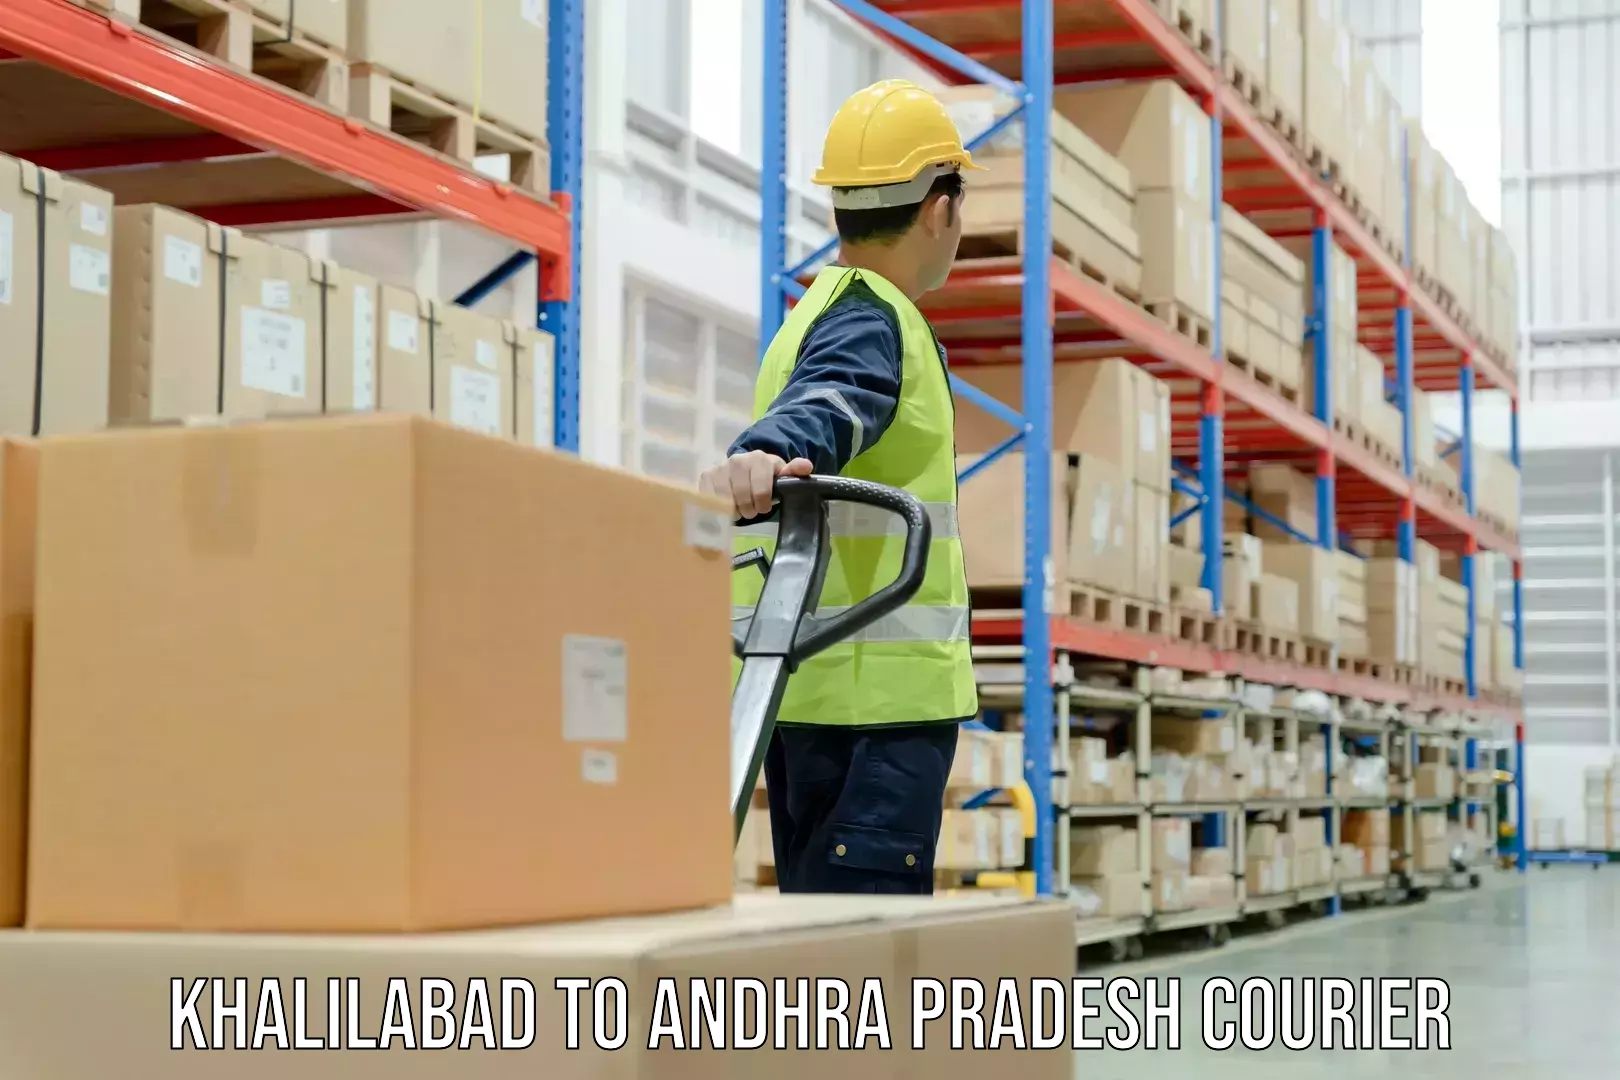 Easy access courier services Khalilabad to Addateegala